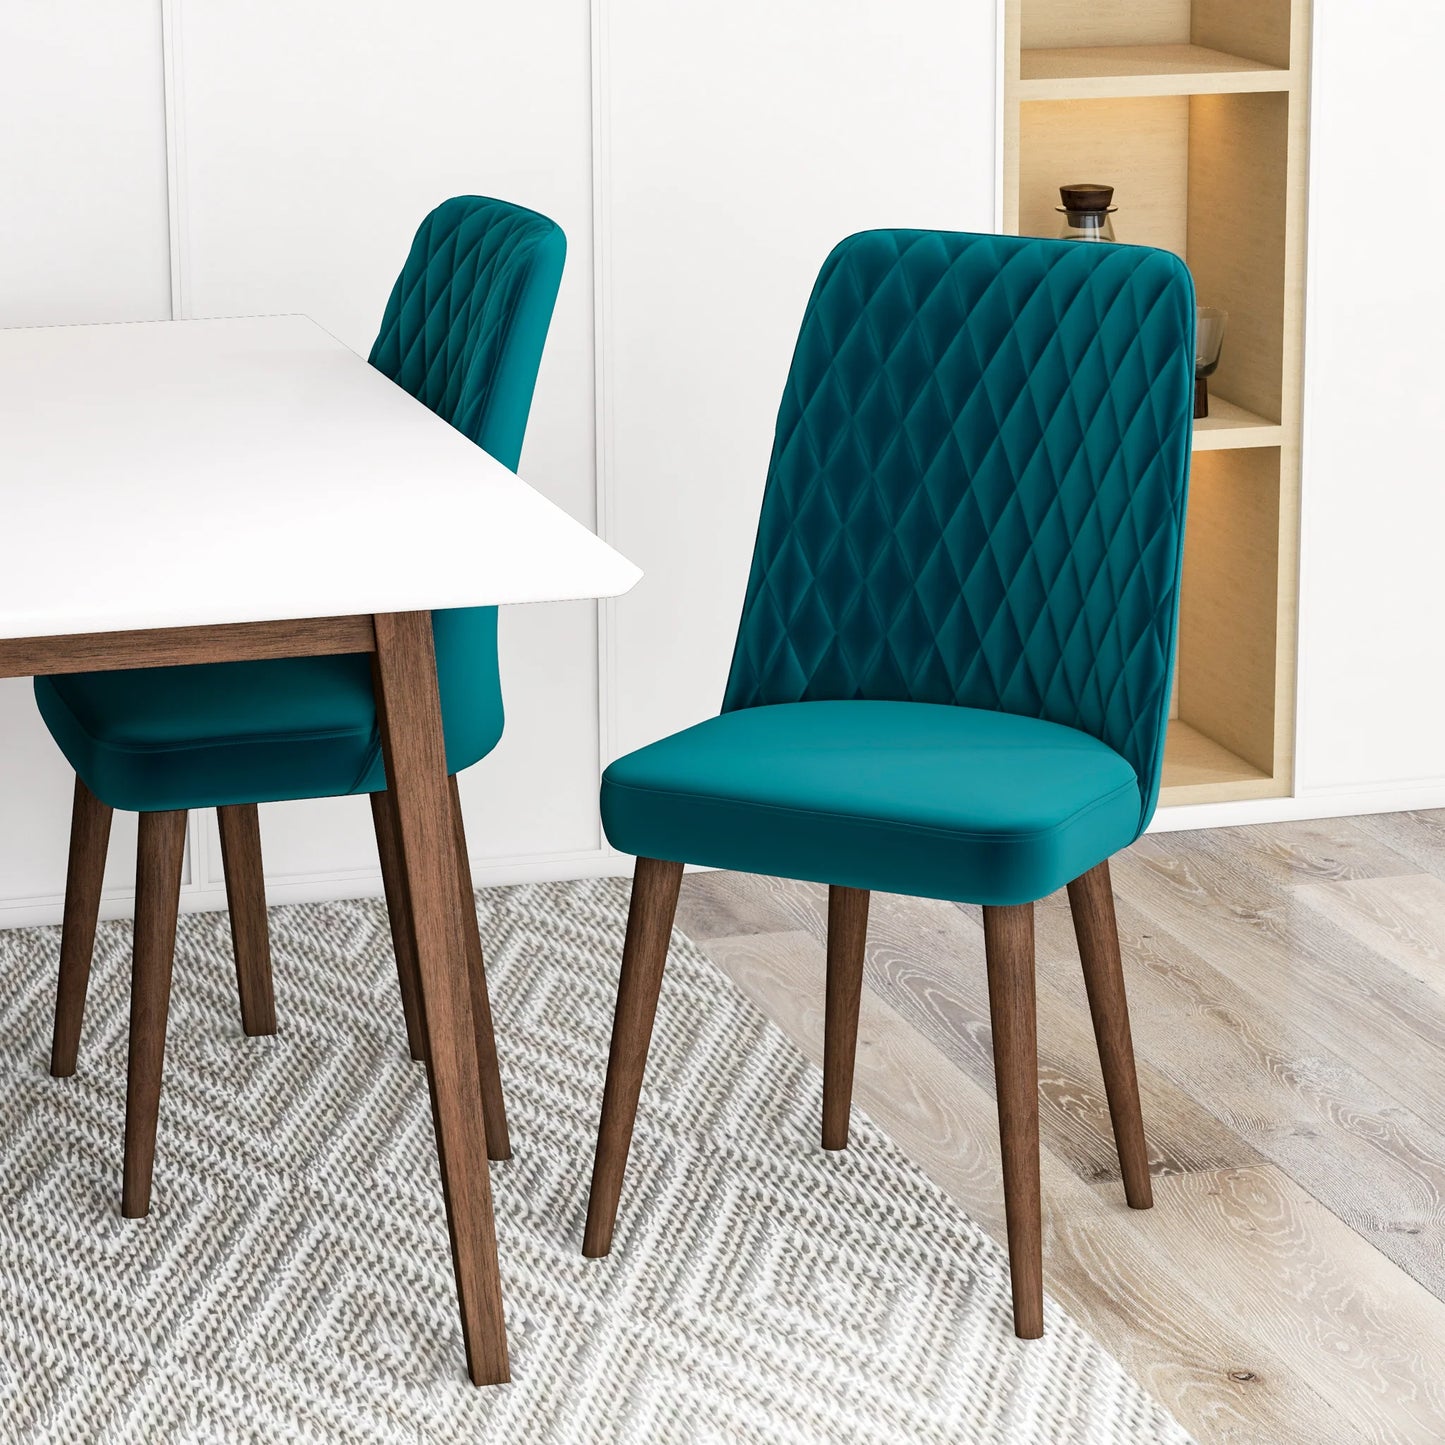 Adira (Small - White) Dining Set with 4 Evette (Teal Velvet) Dining Chairs